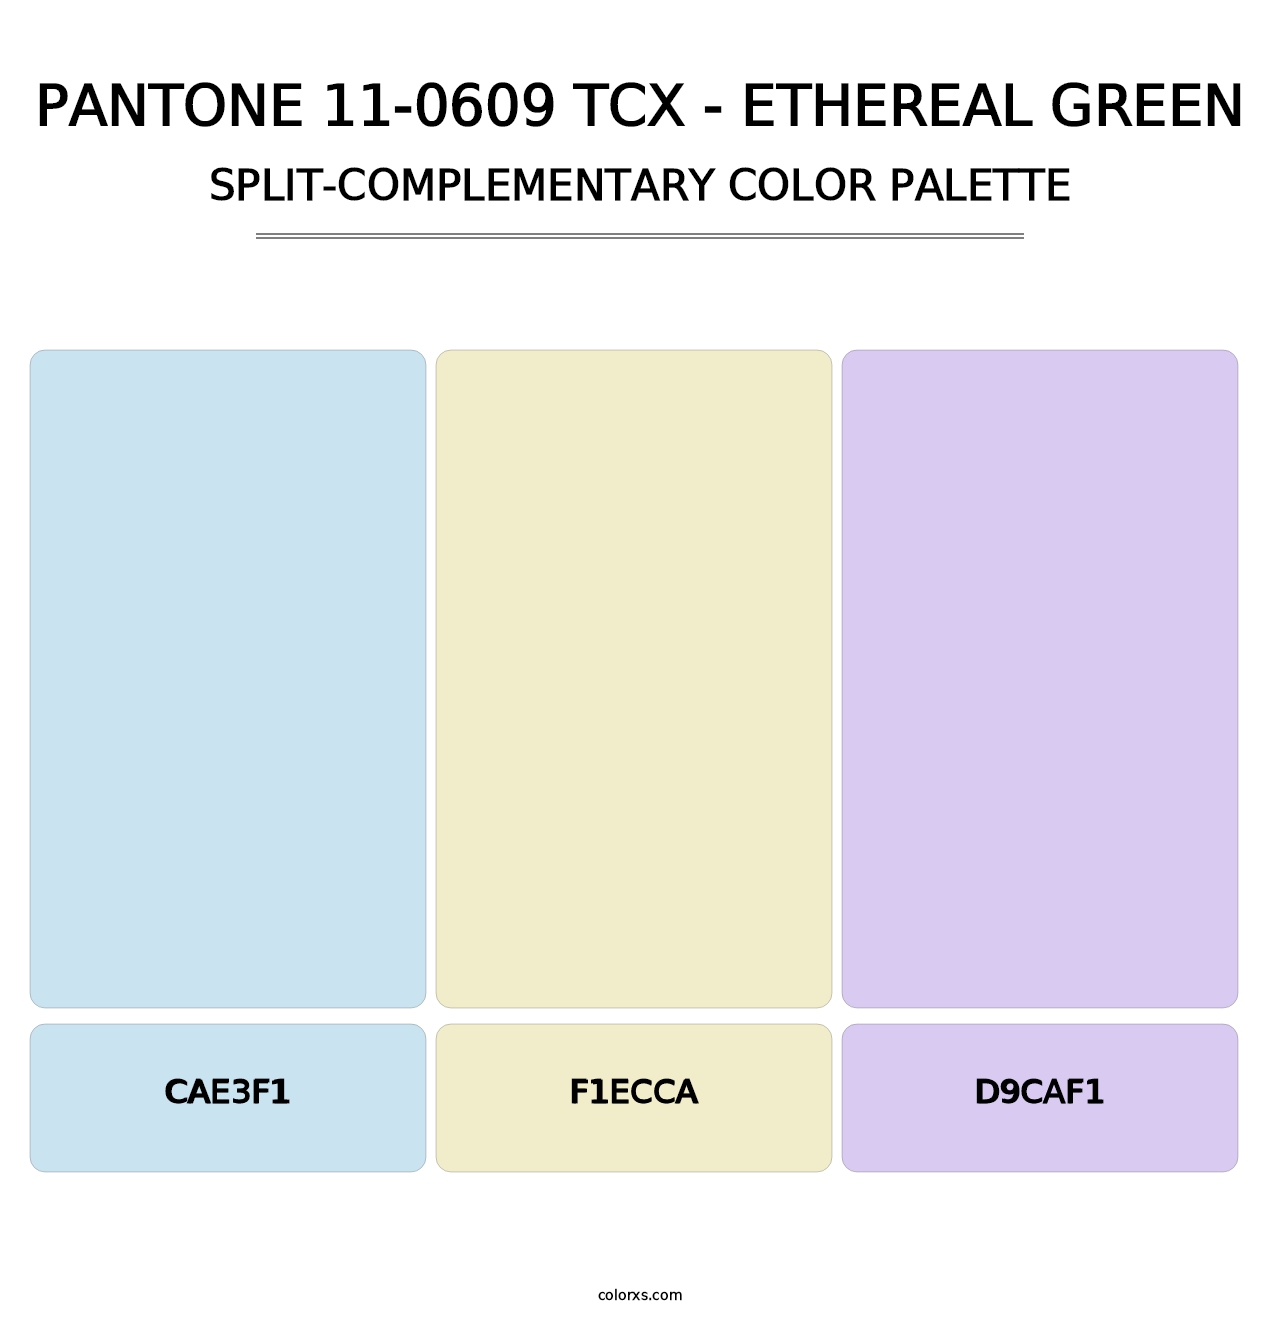 PANTONE 11-0609 TCX - Ethereal Green - Split-Complementary Color Palette